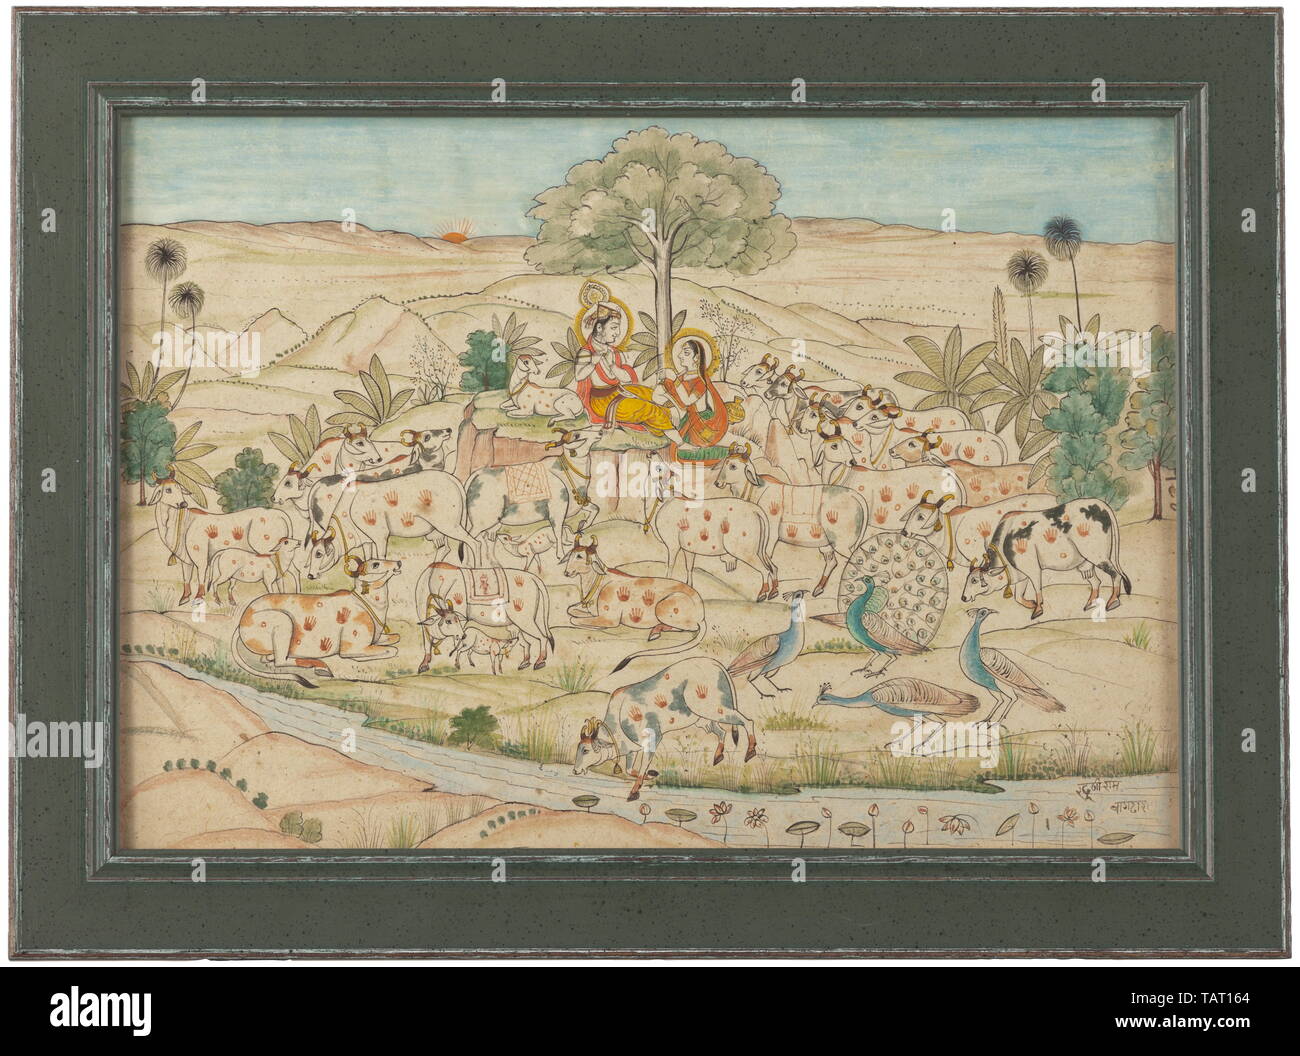 An Indian miniature, Nathadwara School, signed Kubiram Gopilal, early 20th century, Gouache on paper. Depiction of Krishna and Radha under a tree, after decorating the cows. Signed at lower right 'Khubiram Gopilal'. Framed and under glass. Dimensions of frame 29.5 x 39.5 cm. historic, historical, Additional-Rights-Clearance-Info-Not-Available Stock Photo